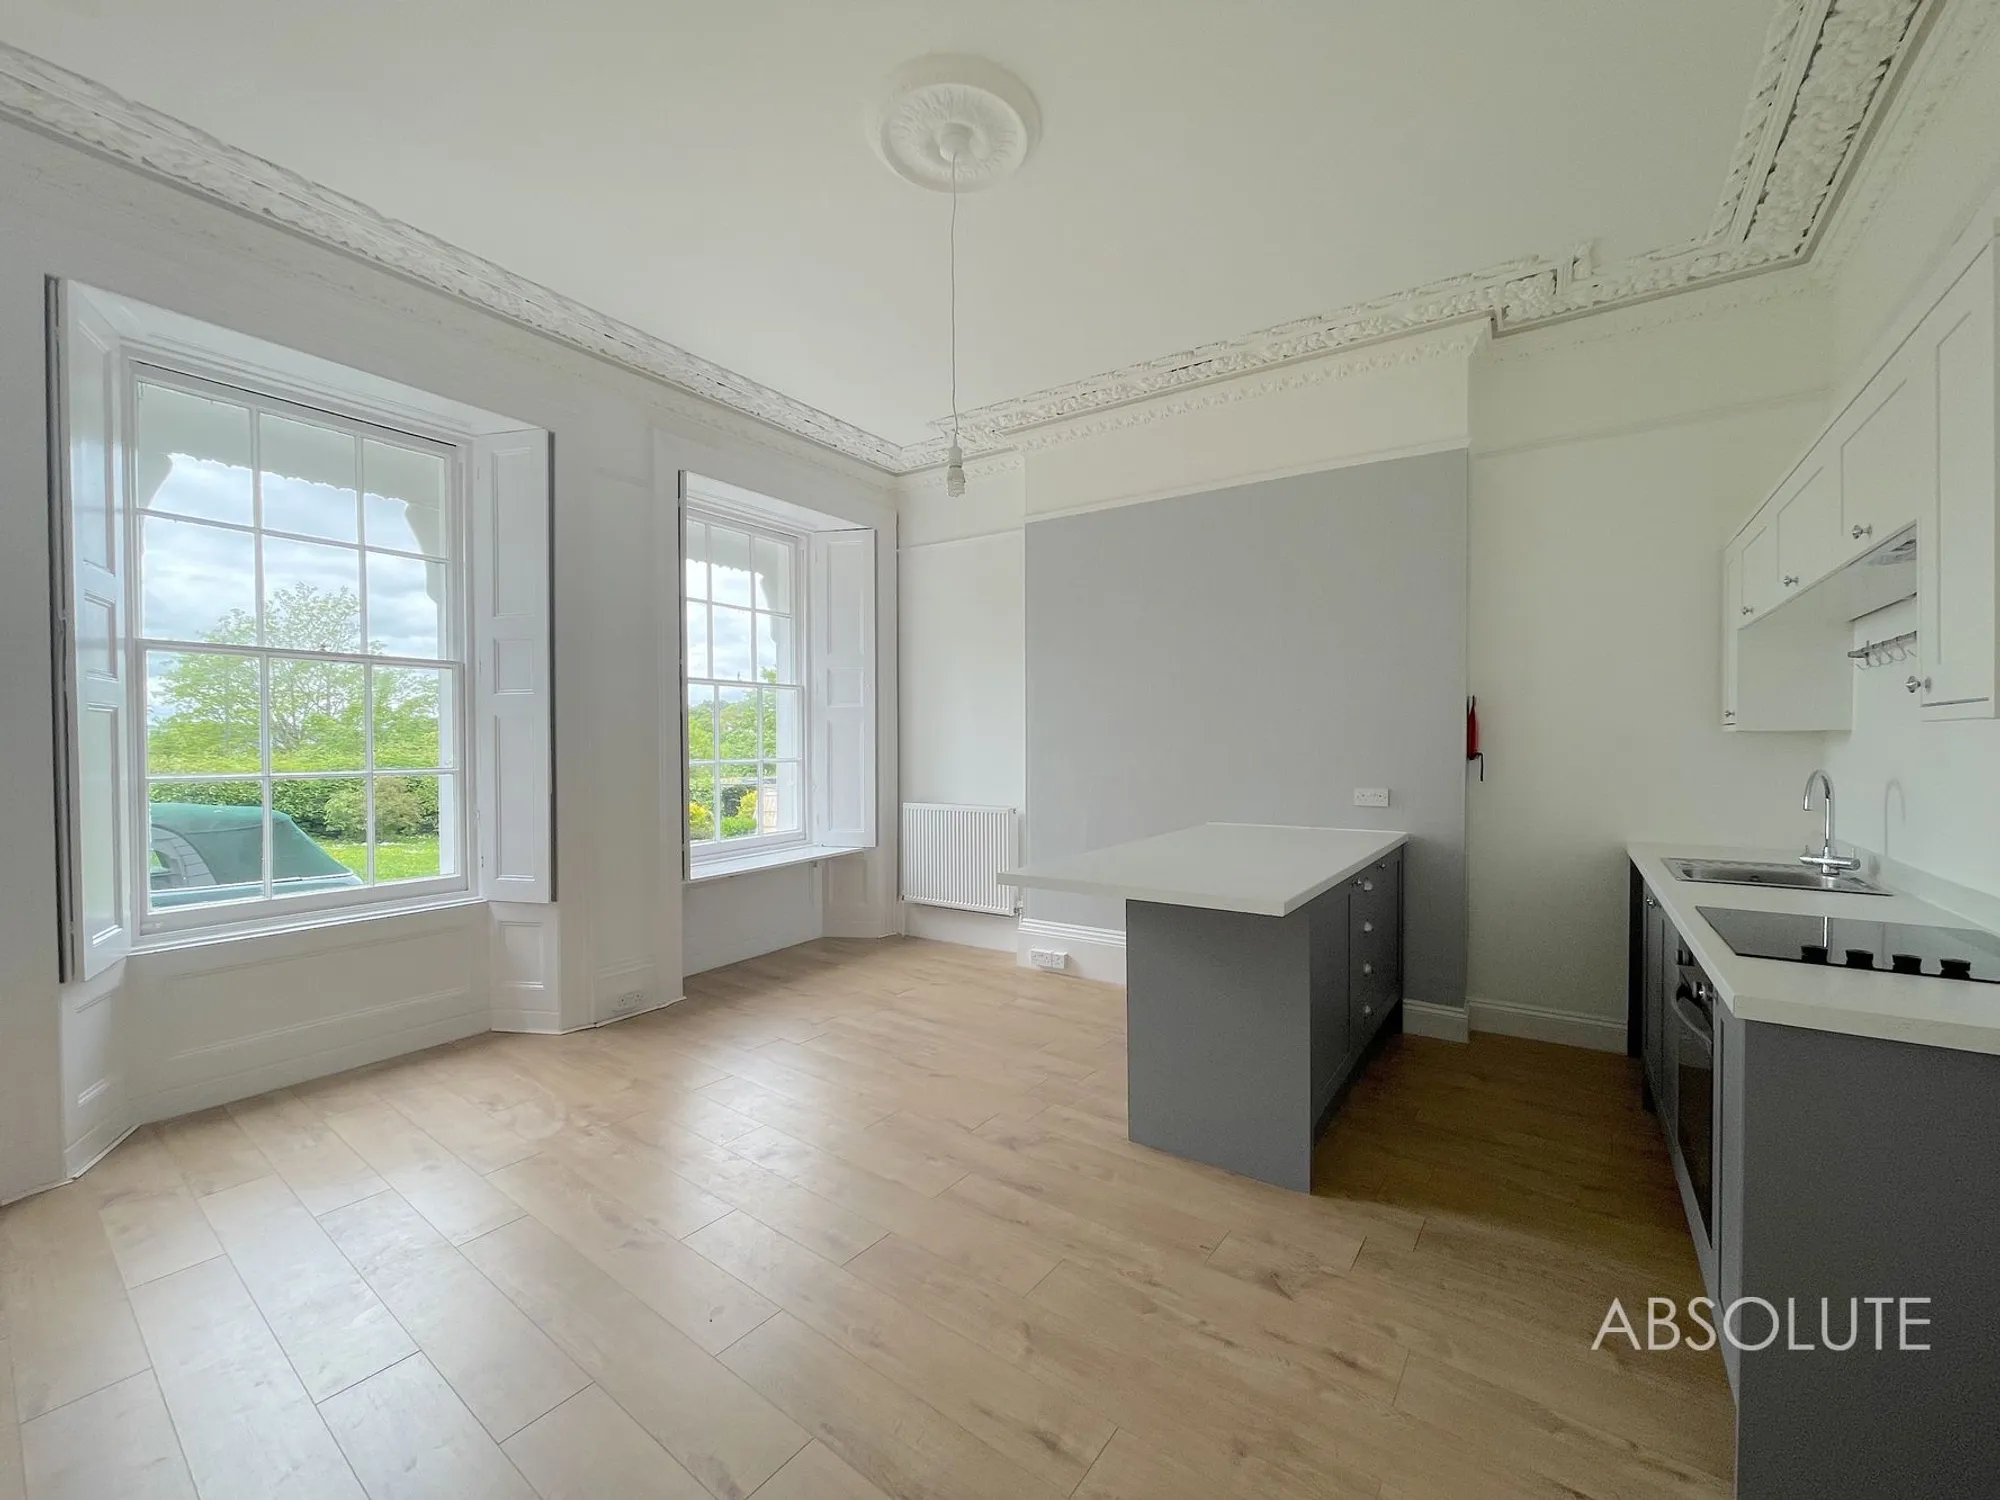 1 bed flat to rent in Lisburne Crescent, Torquay - Property Image 1